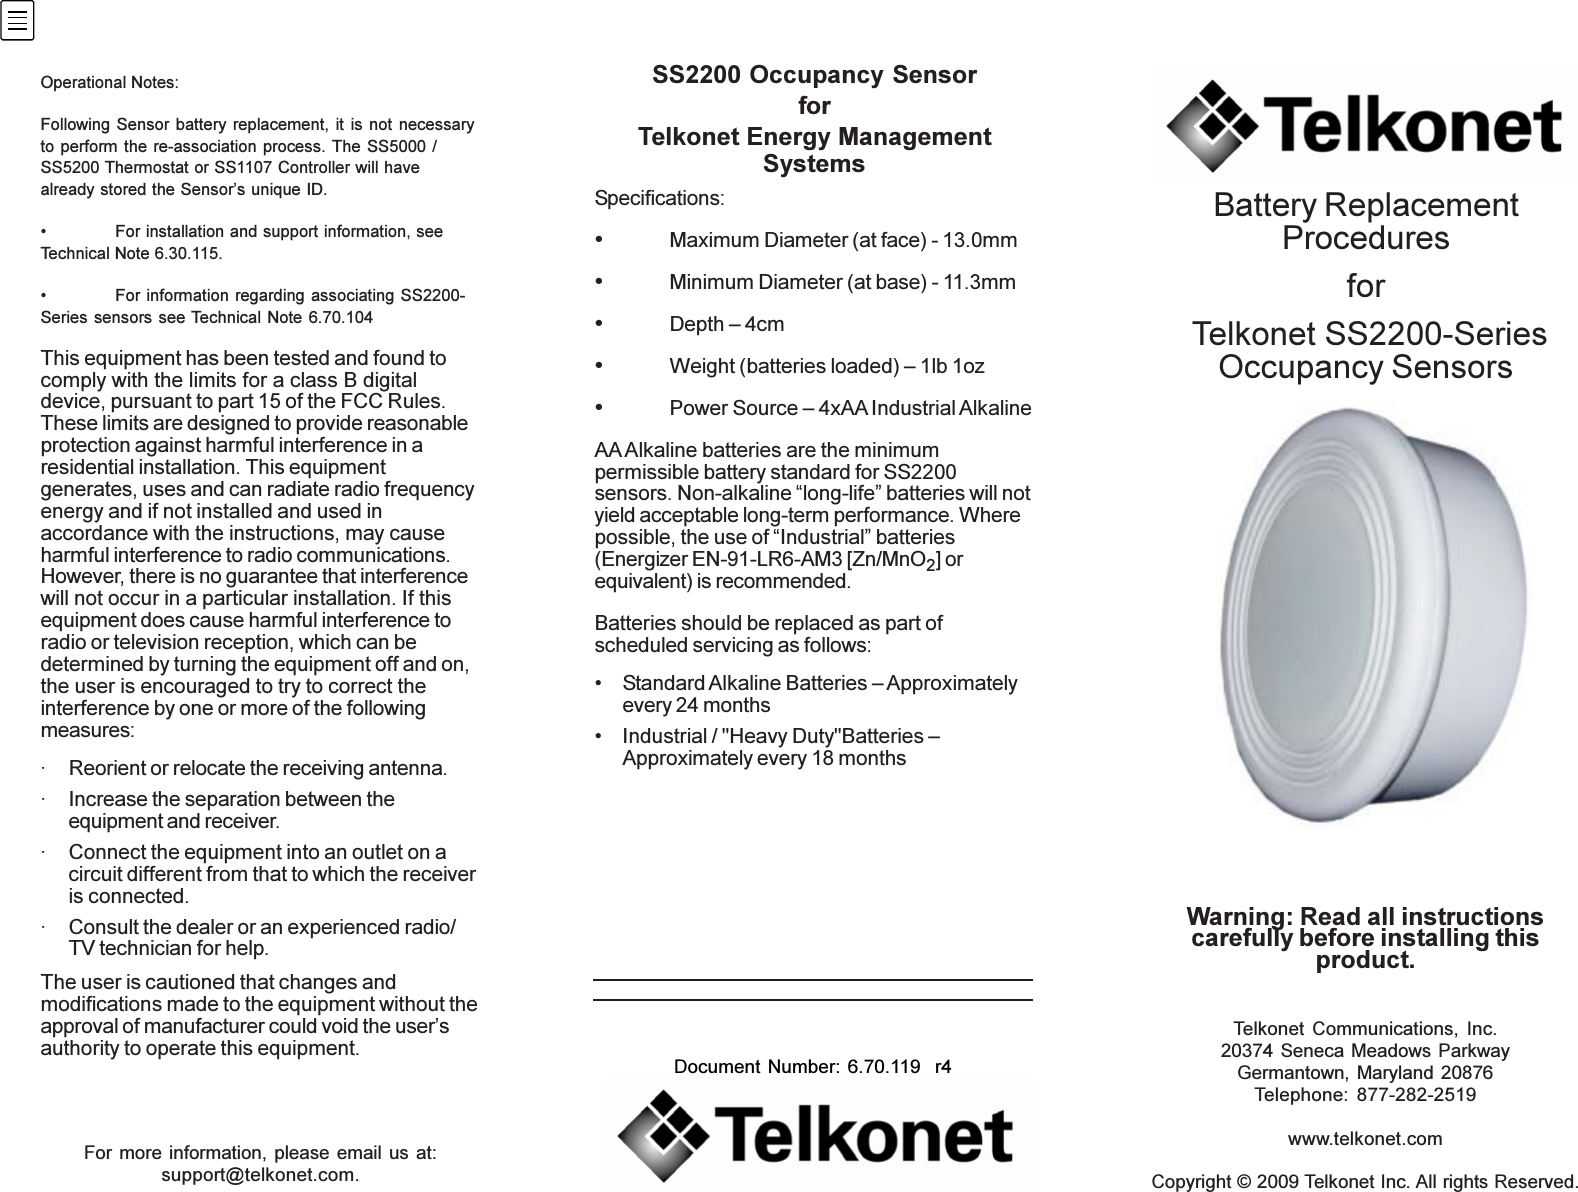 For more information, please email us at:support@telkonet.com.Telkonet Communications, Inc.20374 Seneca Meadows ParkwayGermantown, Maryland 20876Telephone: 877-282-2519www.telkonet.comCopyright © 2009 Telkonet Inc. All rights Reserved.Document Number: 6.70.119  r4Warning: Read all instructionscarefully before installing thisproduct.Battery ReplacementProceduresfor Telkonet SS2200-SeriesOccupancy SensorsSS2200 Occupancy SensorforTelkonet Energy ManagementSystemsSpecifications:•Maximum Diameter (at face) - 13.0mm•Minimum Diameter (at base) - 11.3mm•Depth – 4cm•Weight (batteries loaded) – 1lb 1oz•Power Source – 4xAA Industrial AlkalineAA Alkaline batteries are the minimumpermissible battery standard for SS2200sensors. Non-alkaline “long-life” batteries will notyield acceptable long-term performance. Wherepossible, the use of “Industrial” batteries(Energizer EN-91-LR6-AM3 [Zn/MnO2] orequivalent) is recommended.Batteries should be replaced as part ofscheduled servicing as follows:• Standard Alkaline Batteries – Approximatelyevery 24 months• Industrial / &quot;Heavy Duty&quot;Batteries –Approximately every 18 monthsOperational Notes:Following Sensor battery replacement, it is not necessaryto perform the re-association process. The SS5000 /SS5200 Thermostat or SS1107 Controller will havealready stored the Sensor’s unique ID.• For installation and support information, seeTechnical Note 6.30.115.• For information regarding associating SS2200-Series sensors see Technical Note 6.70.104This equipment has been tested and found tocomply with the limits for a class B digitaldevice, pursuant to part 15 of the FCC Rules.These limits are designed to provide reasonableprotection against harmful interference in aresidential installation. This equipmentgenerates, uses and can radiate radio frequencyenergy and if not installed and used inaccordance with the instructions, may causeharmful interference to radio communications.However, there is no guarantee that interferencewill not occur in a particular installation. If thisequipment does cause harmful interference toradio or television reception, which can bedetermined by turning the equipment off and on,the user is encouraged to try to correct theinterference by one or more of the followingmeasures:· Reorient or relocate the receiving antenna.· Increase the separation between theequipment and receiver.· Connect the equipment into an outlet on acircuit different from that to which the receiveris connected.· Consult the dealer or an experienced radio/TV technician for help.The user is cautioned that changes andmodifications made to the equipment without theapproval of manufacturer could void the user’sauthority to operate this equipment.